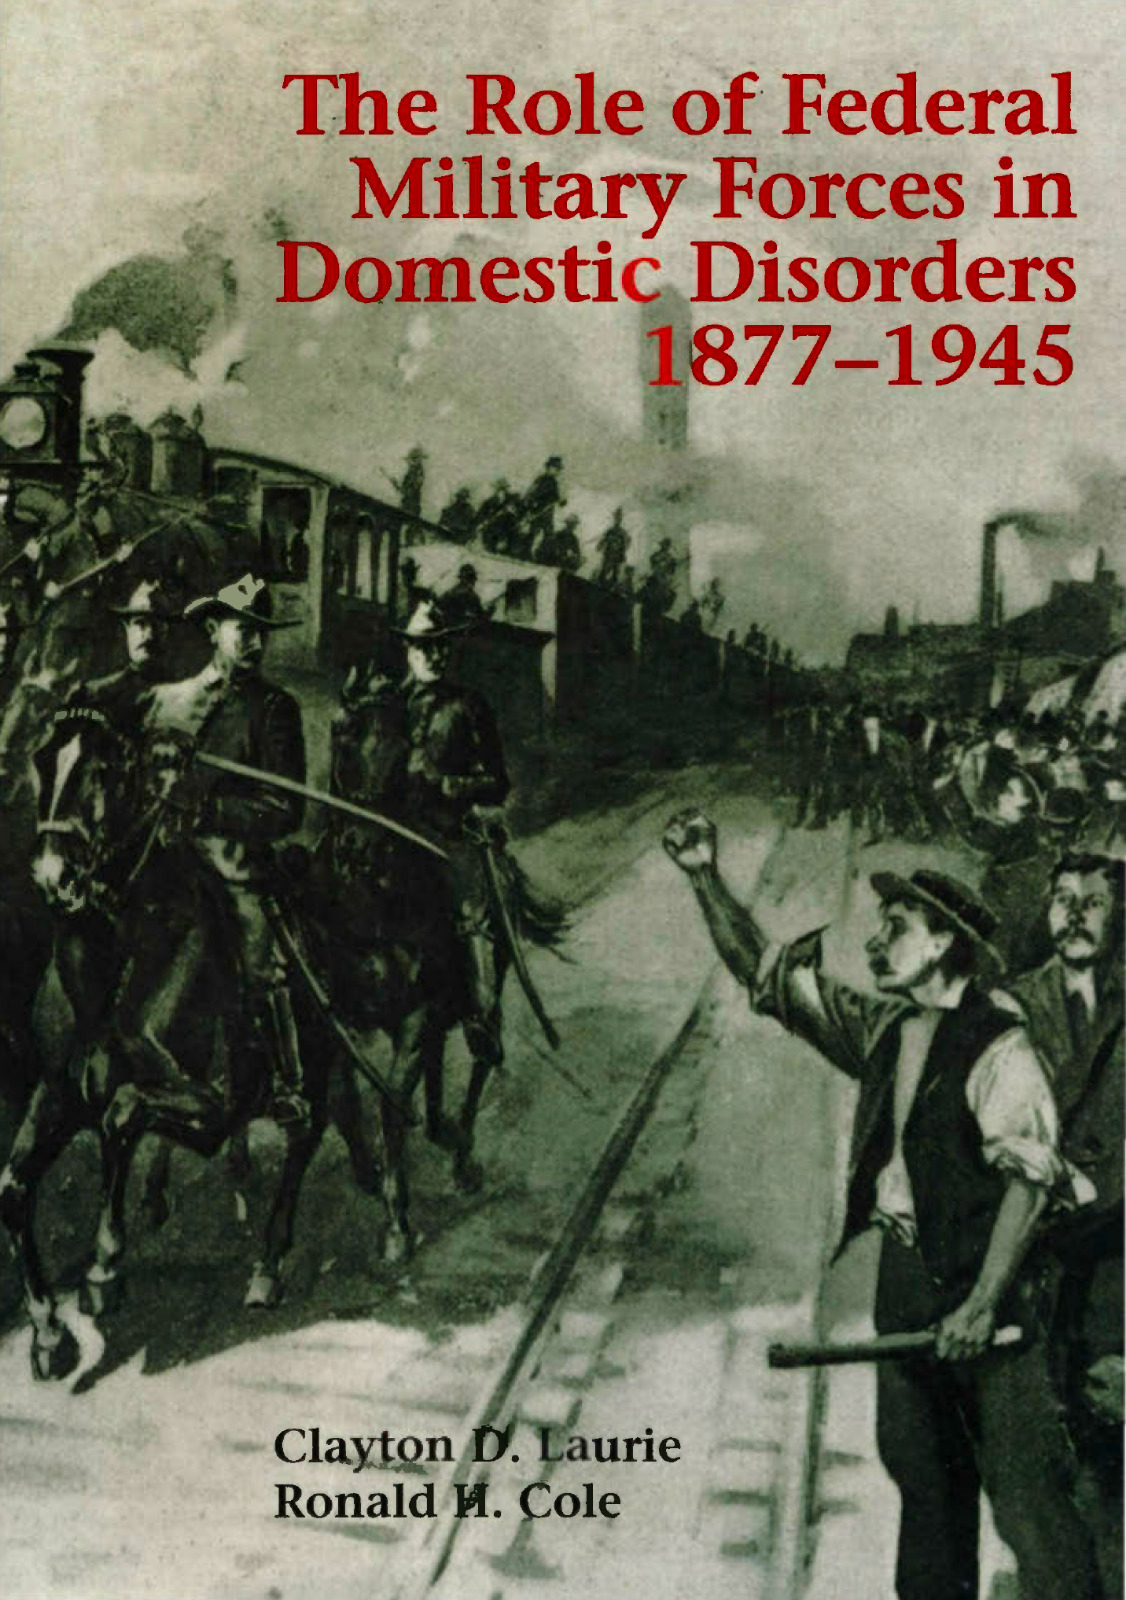 496 Page Role Federal Military Forces in Domestic Disorder 1877-1945 on Data CD